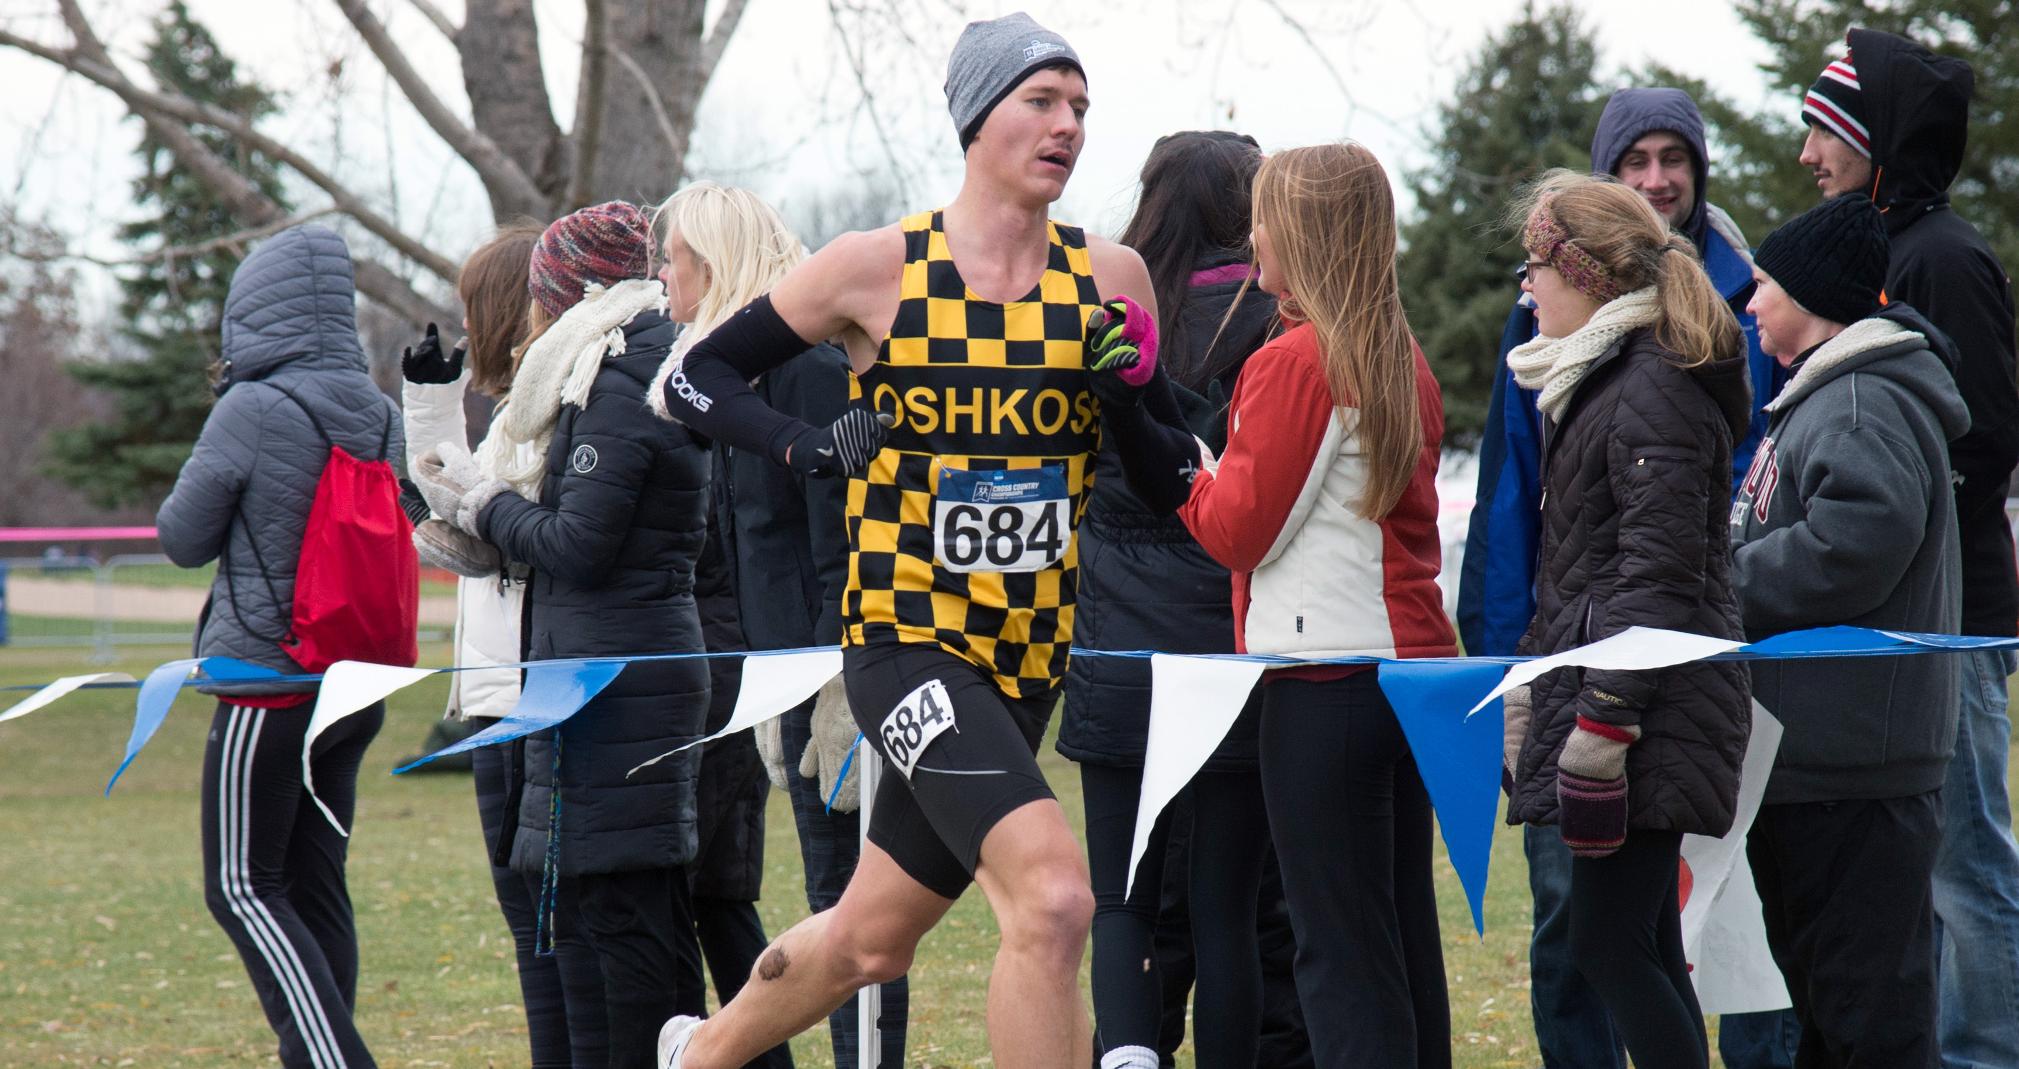 Jordan Carpenter concluded his fourth appearance at the NCAA Division III Championship with an All-America award.